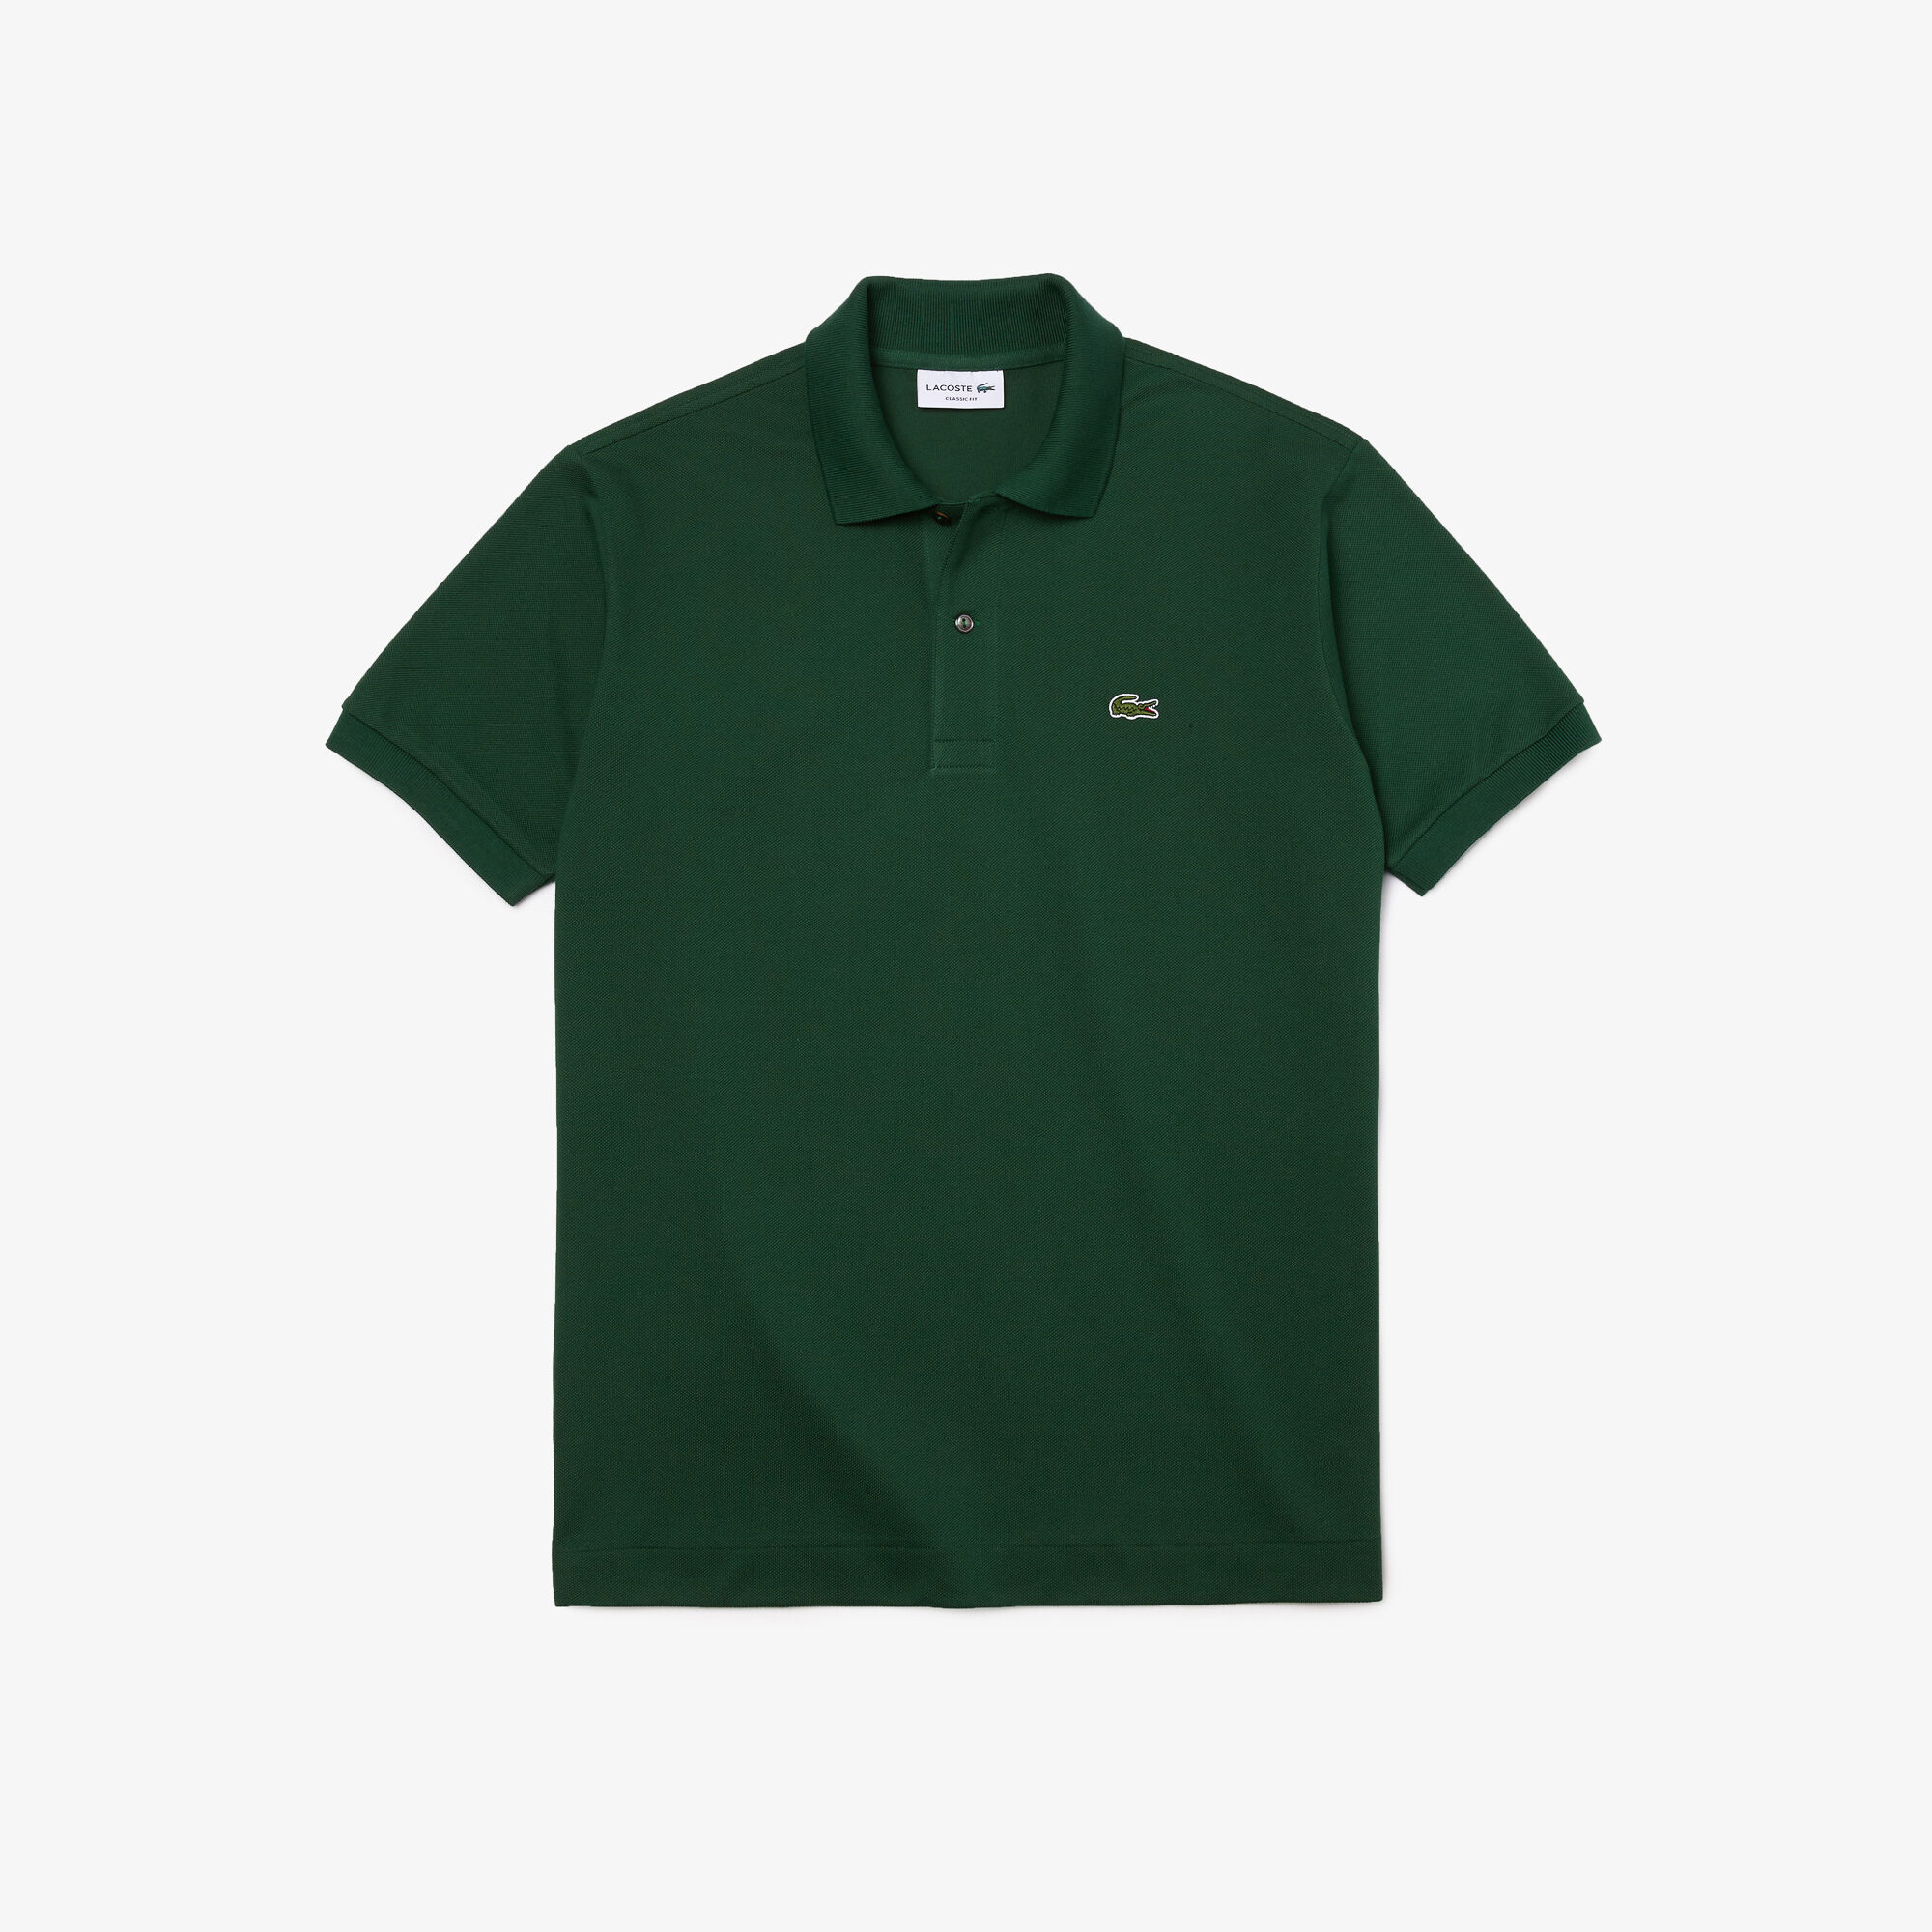 lacoste t shirt price malaysia